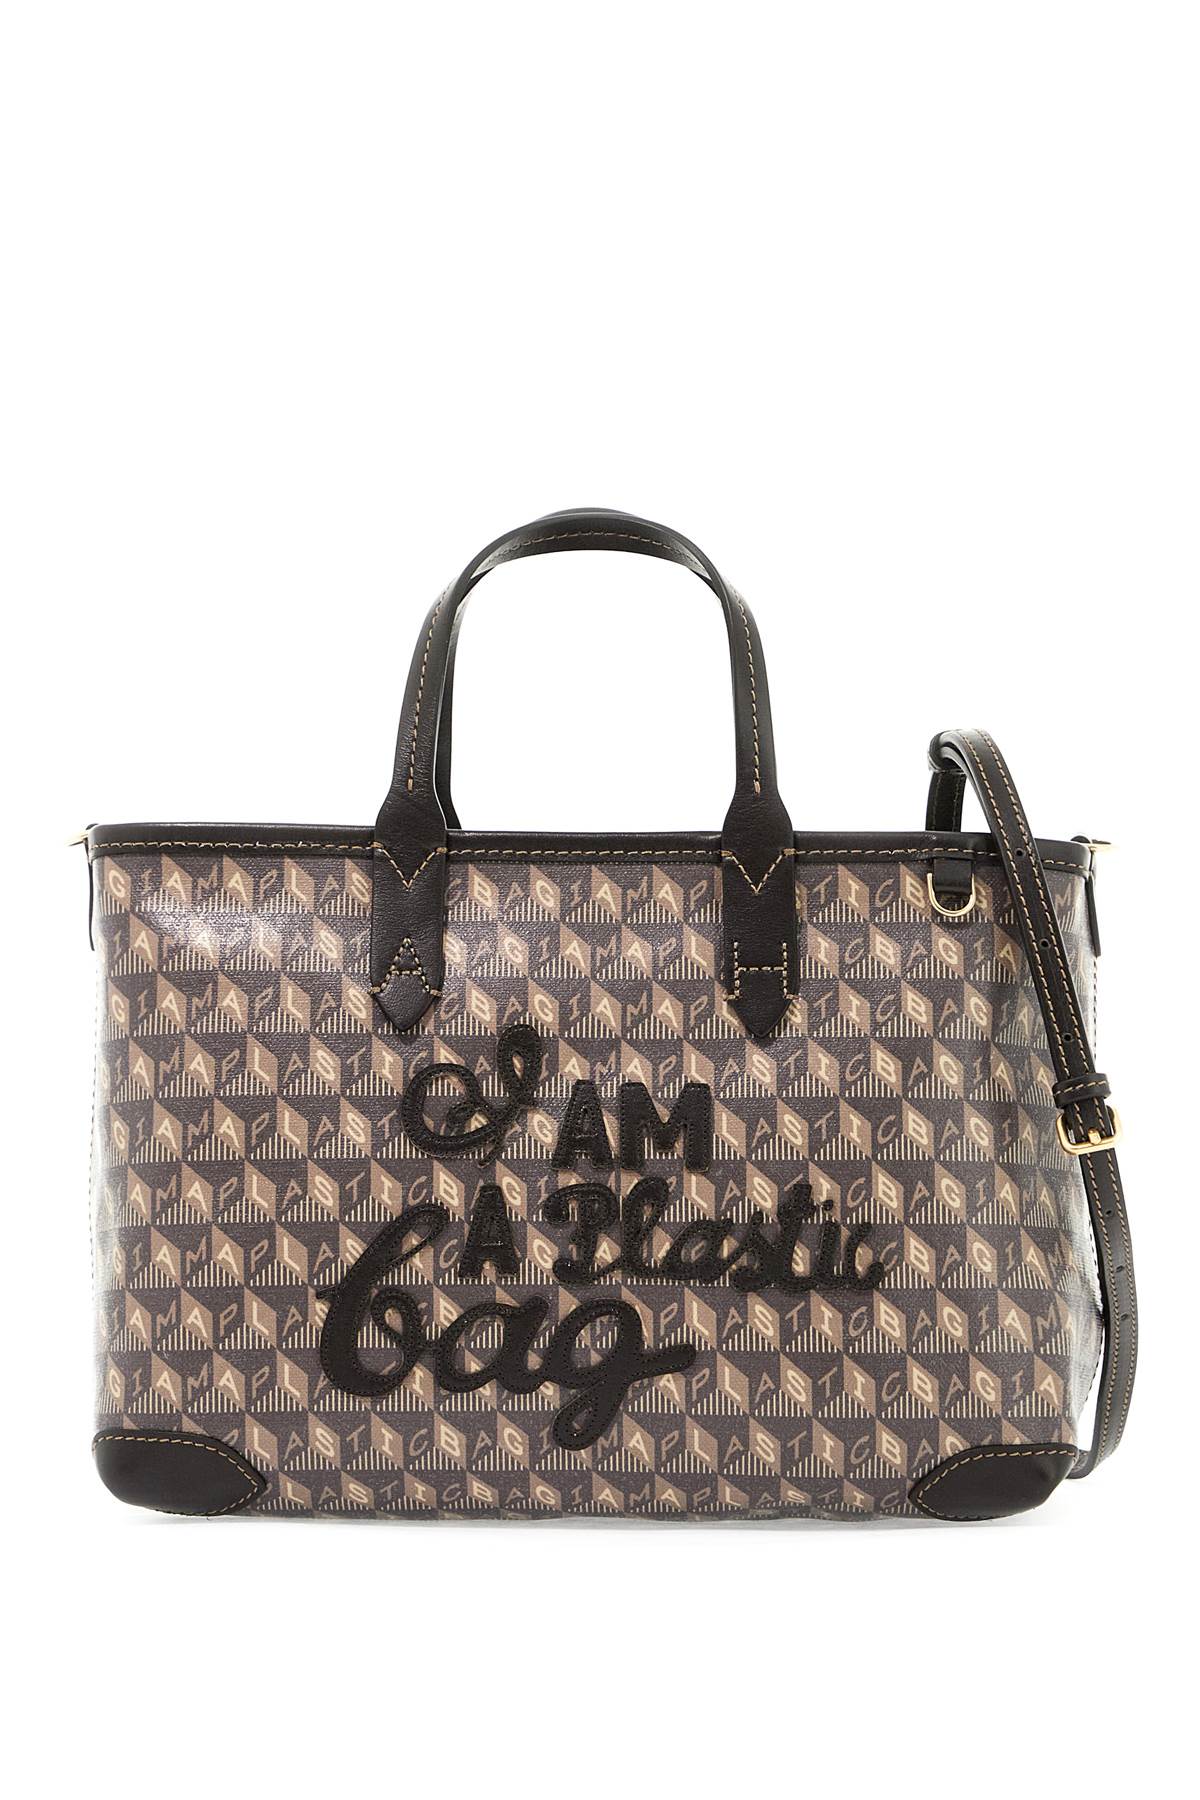 Anya Hindmarch Tote Bag "i Am A Plastic Bagreplace With Double Quote With   Brown